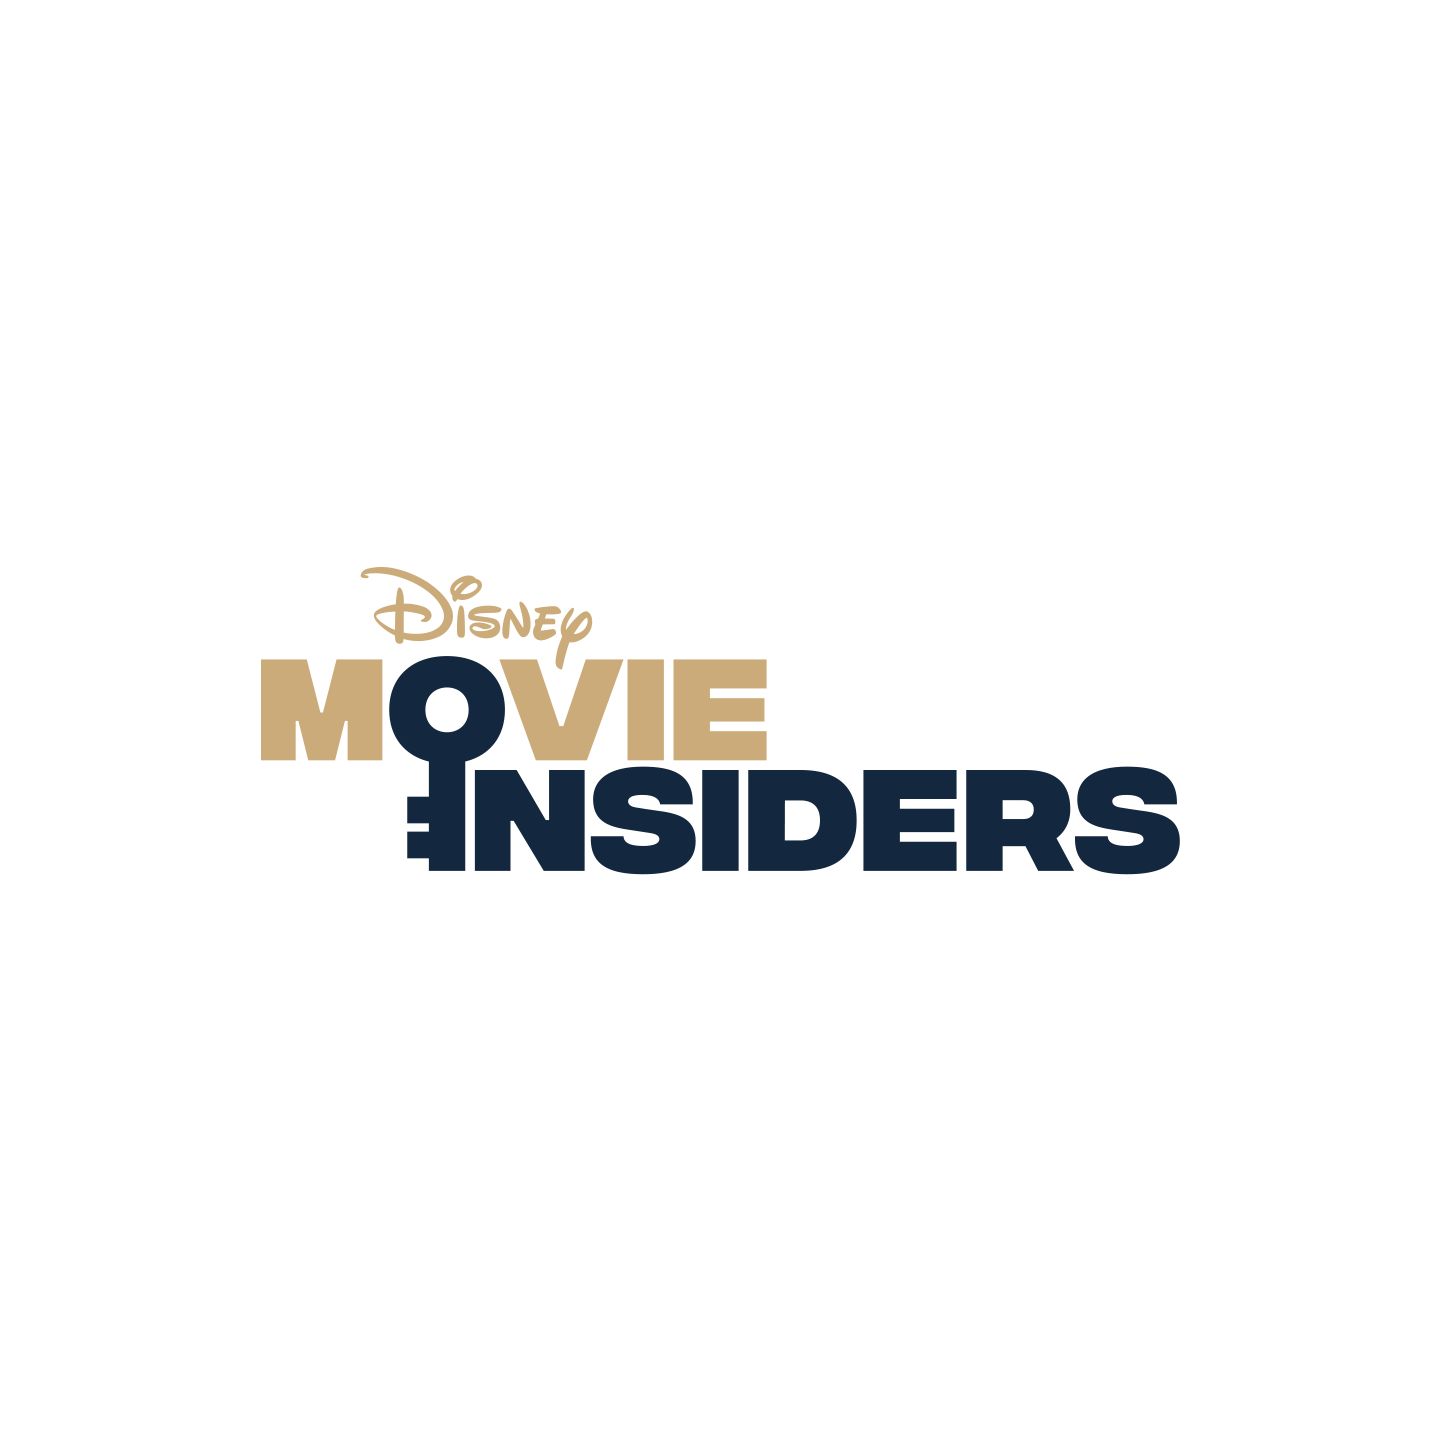 Disney Movie Insiders Presents - ENCANTO - Listen to our new episode to get ready for Walt Disney Animation Studios' 60th feature film. LISTEN NOW